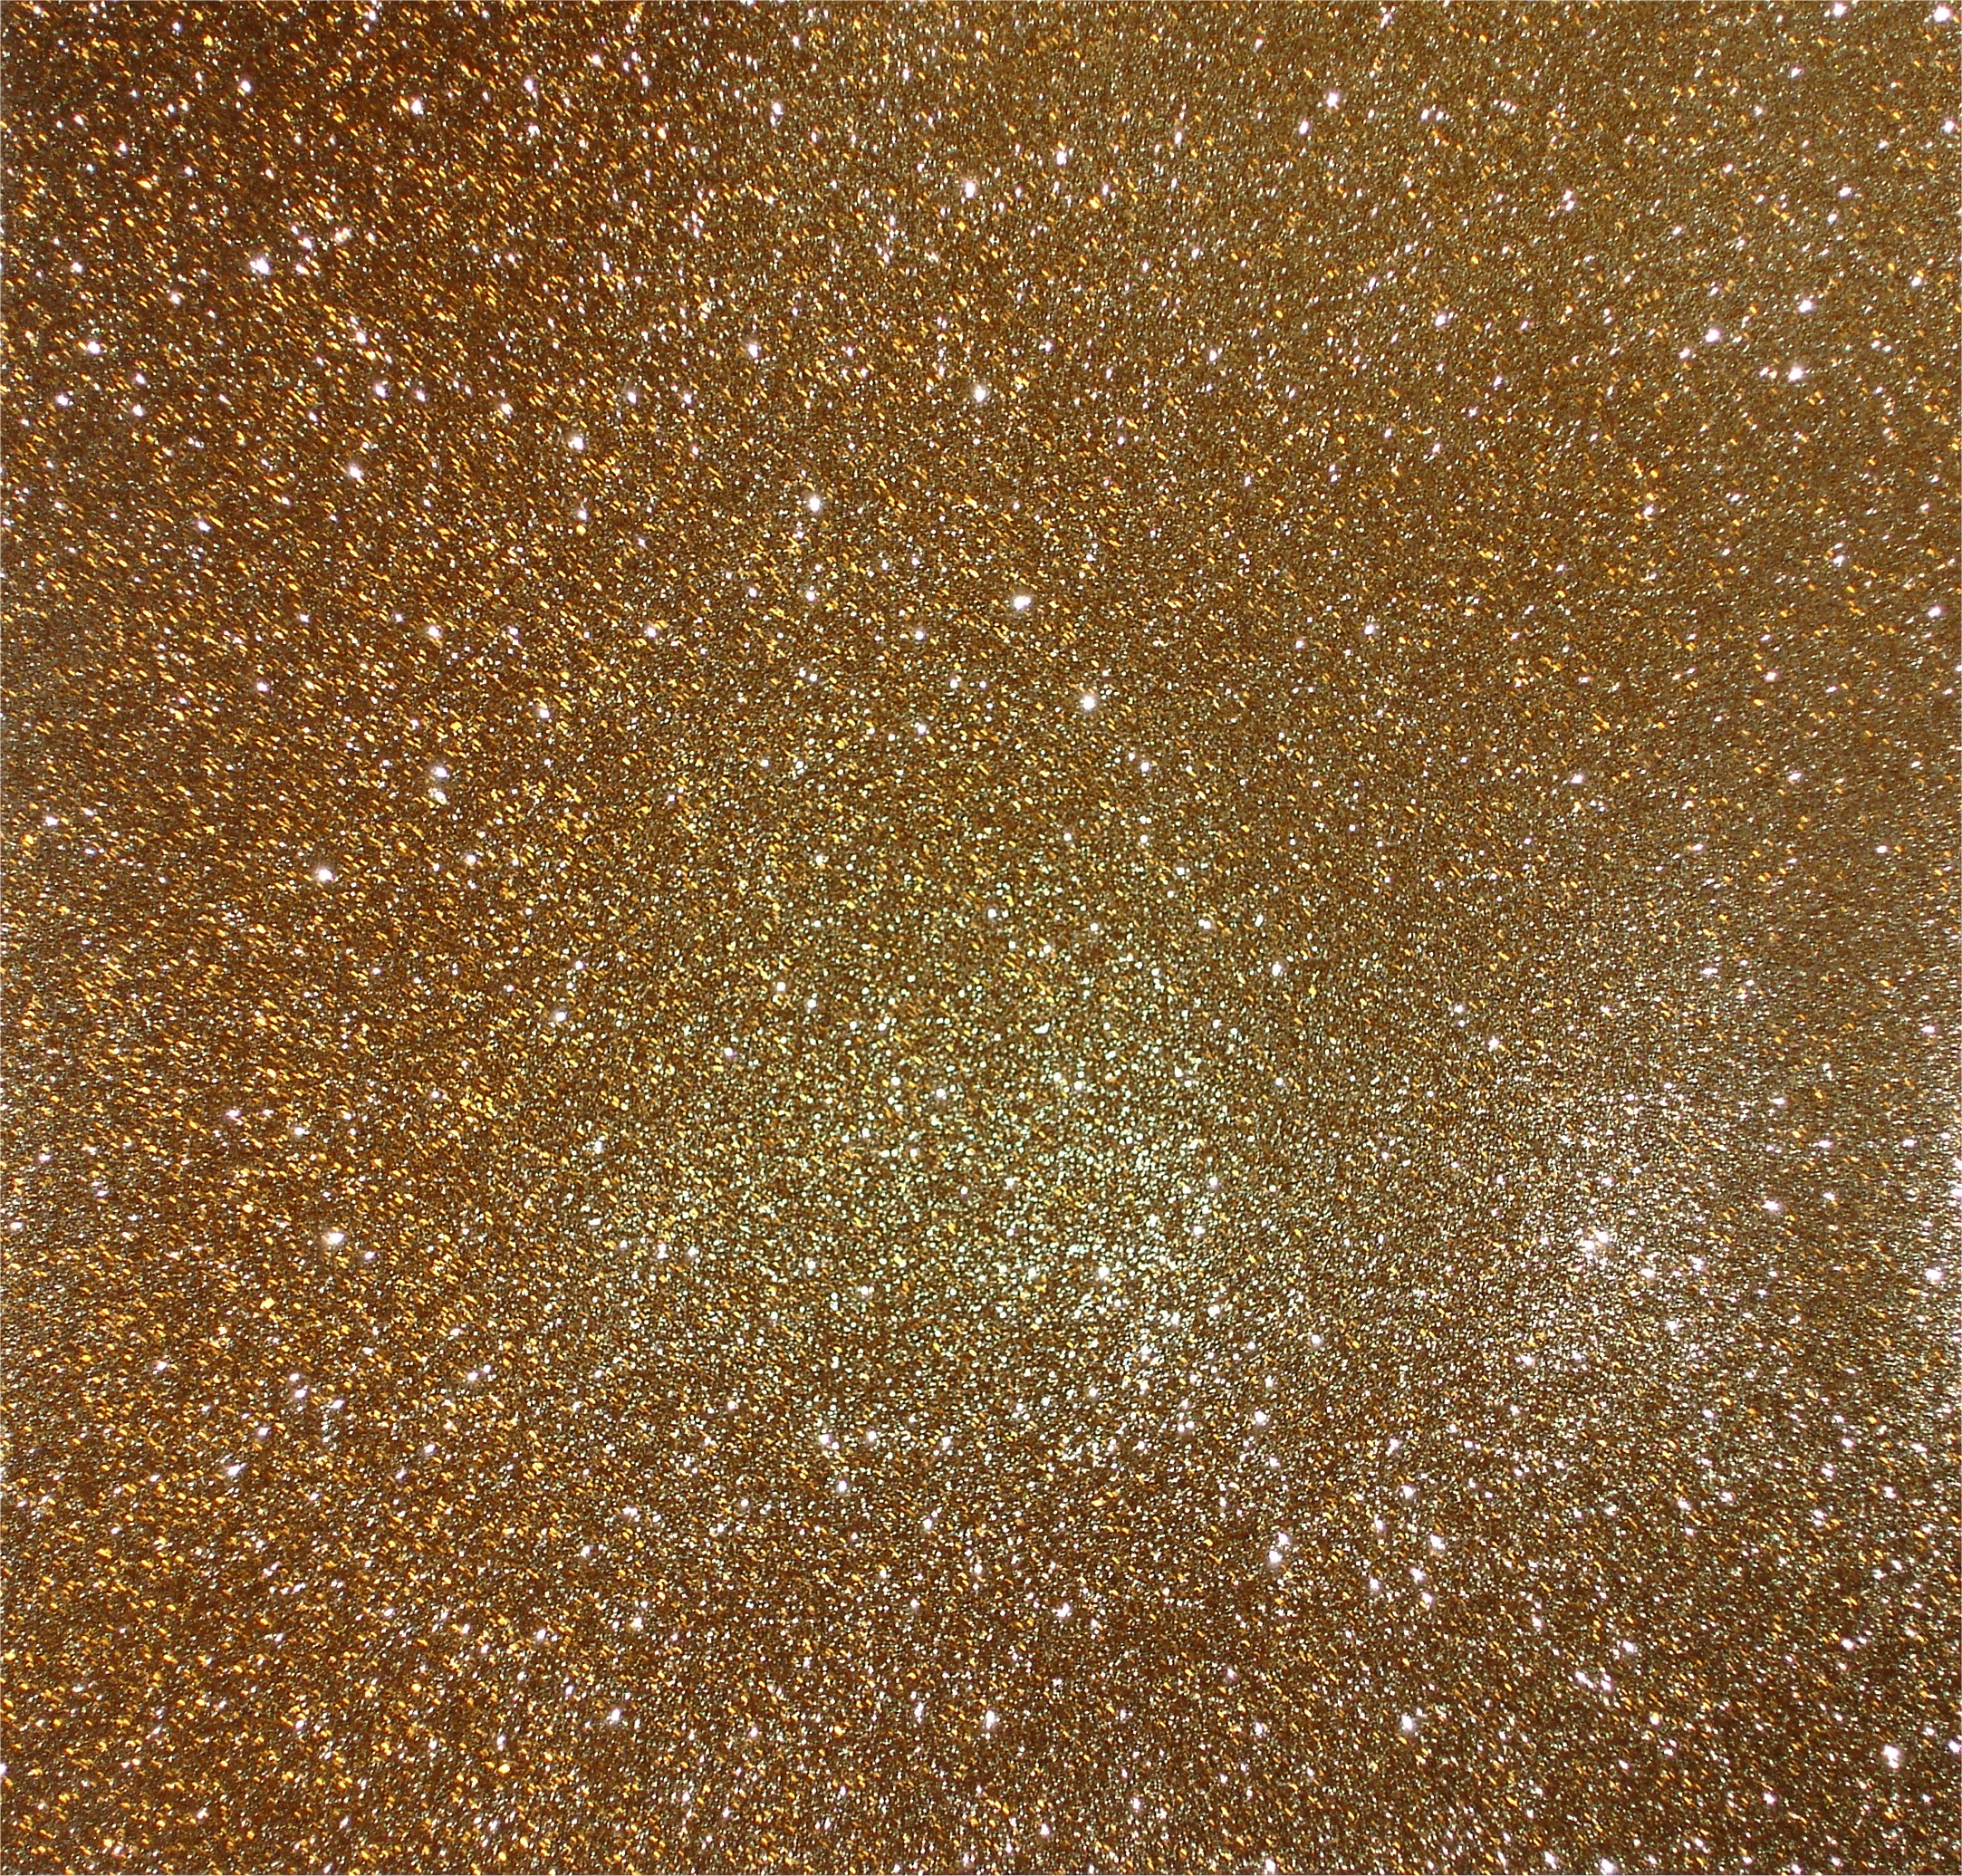 Gold Glitter Paper by Aquastock on